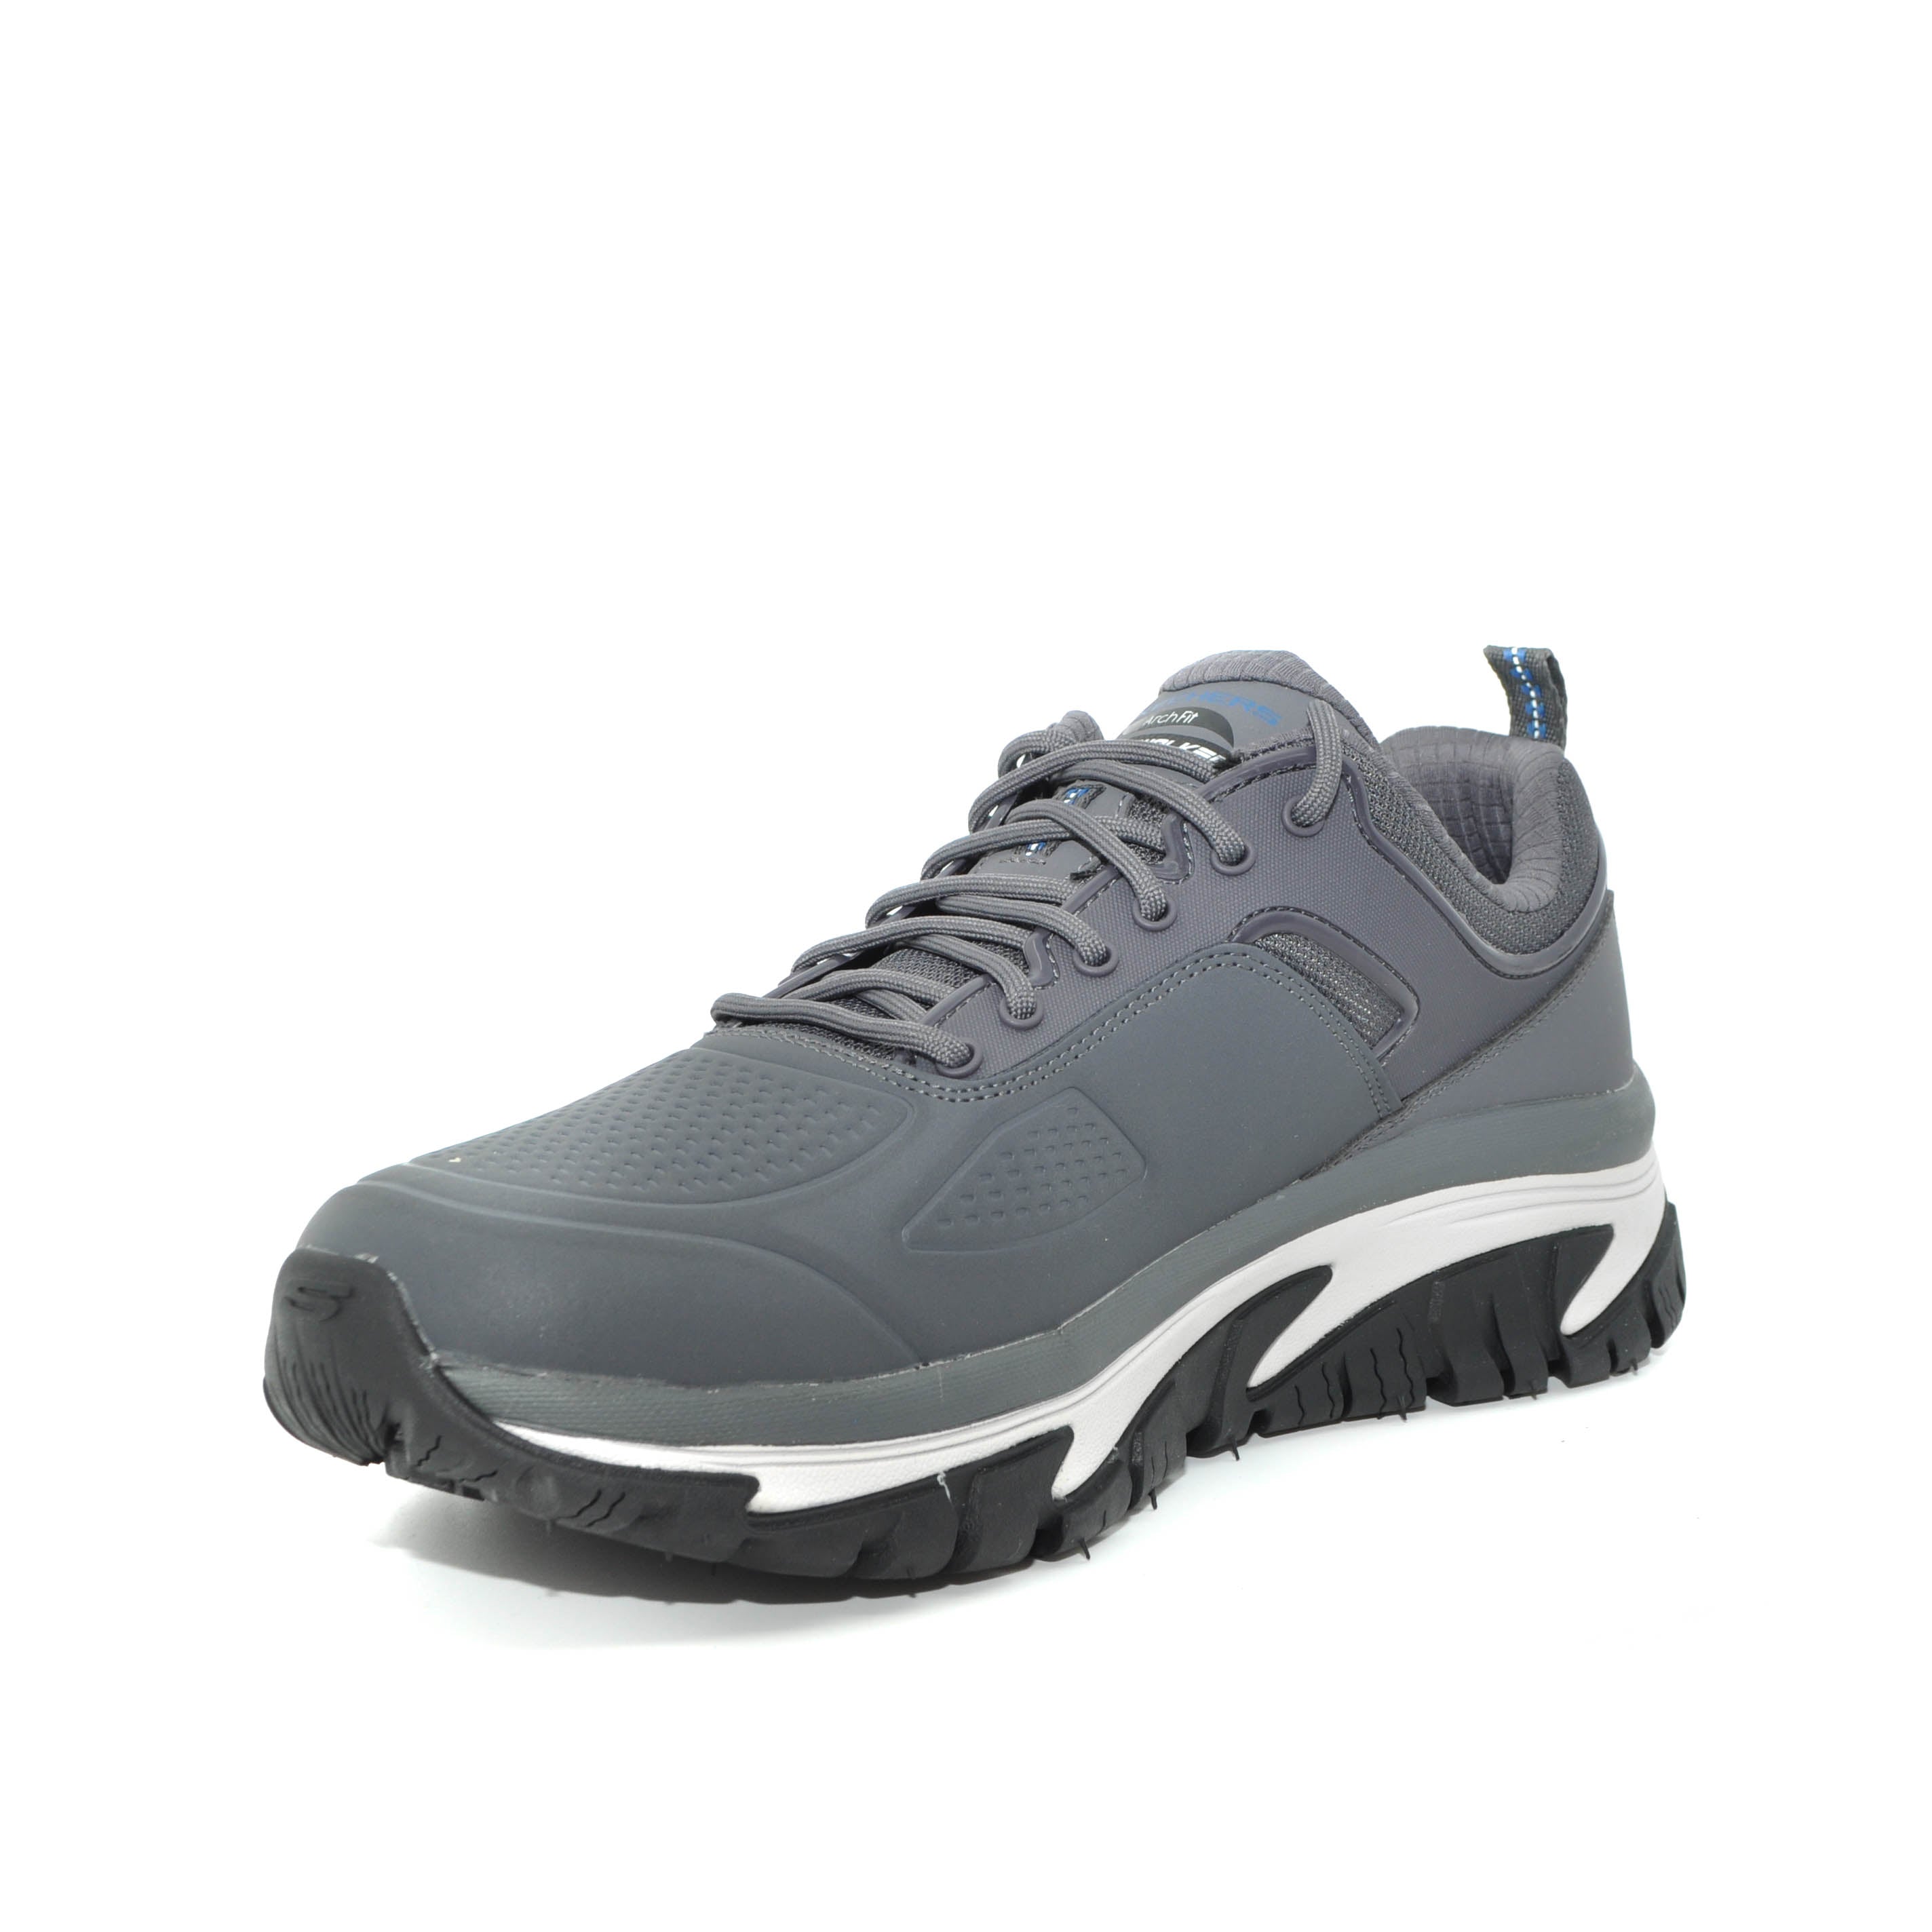 Skechers casual shoes for men